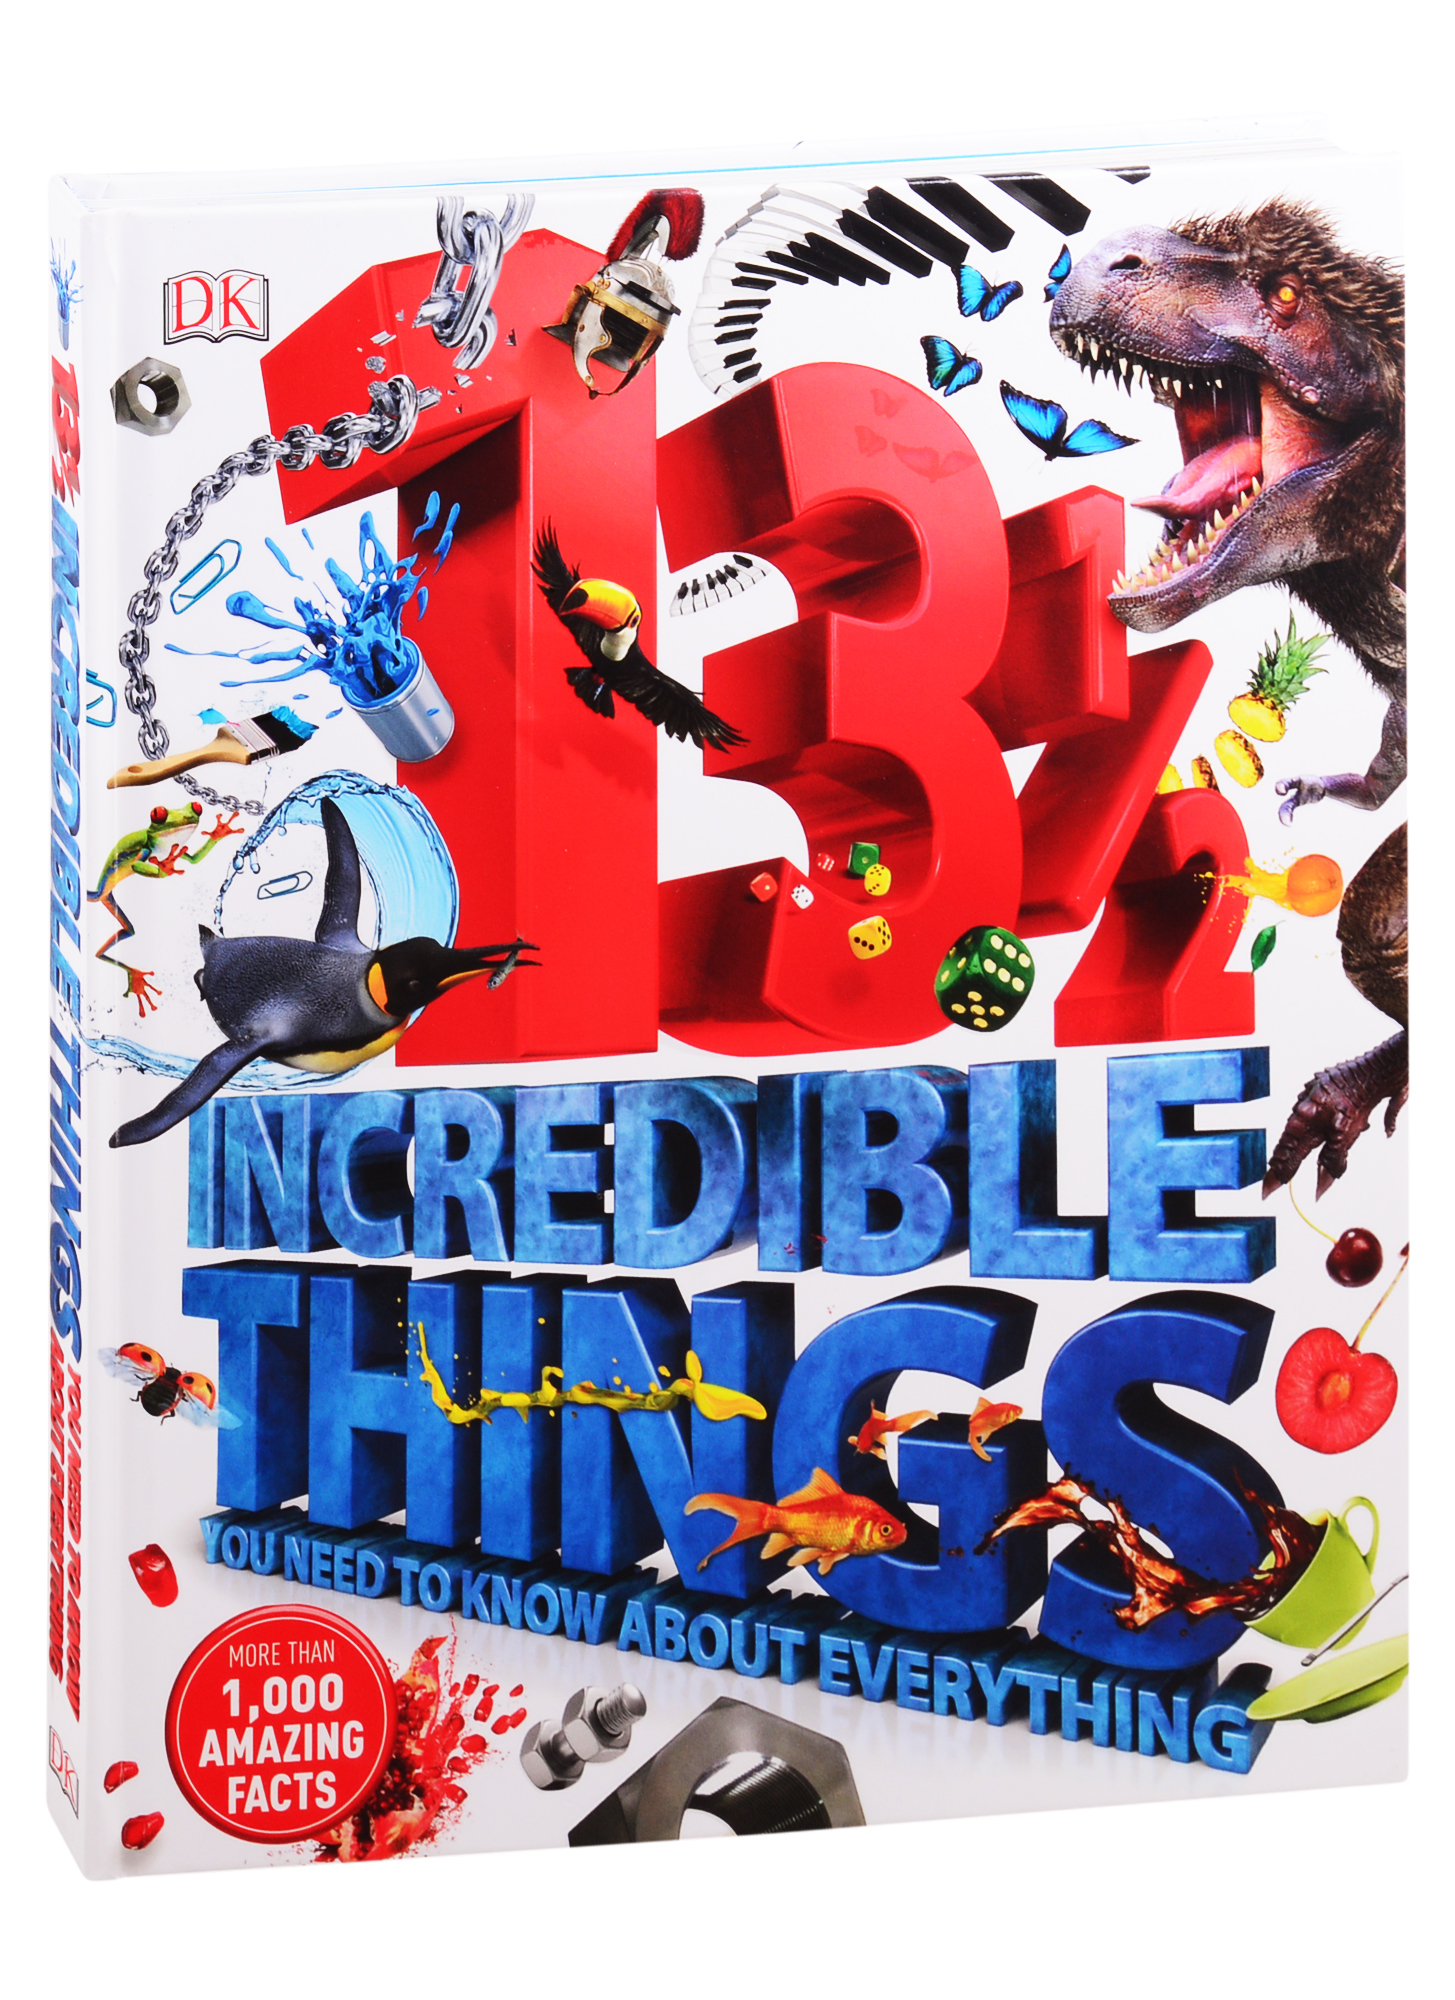  - 13 1/2 Incredible Things You Need to Know About Everything